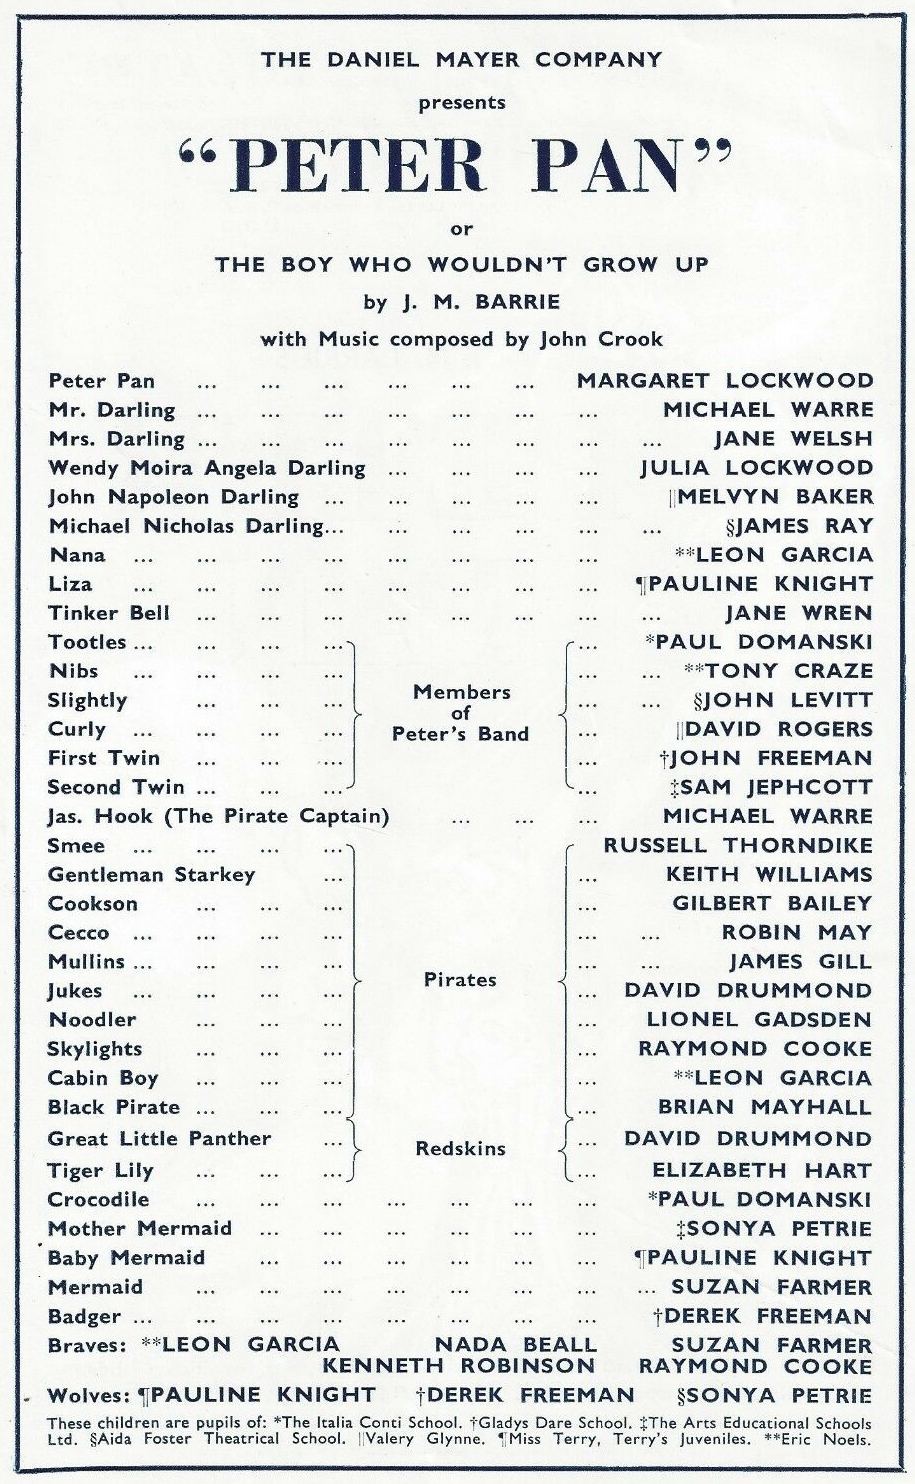 Programme from the Scala Theatre, 1957 production of Peter Pan (2)